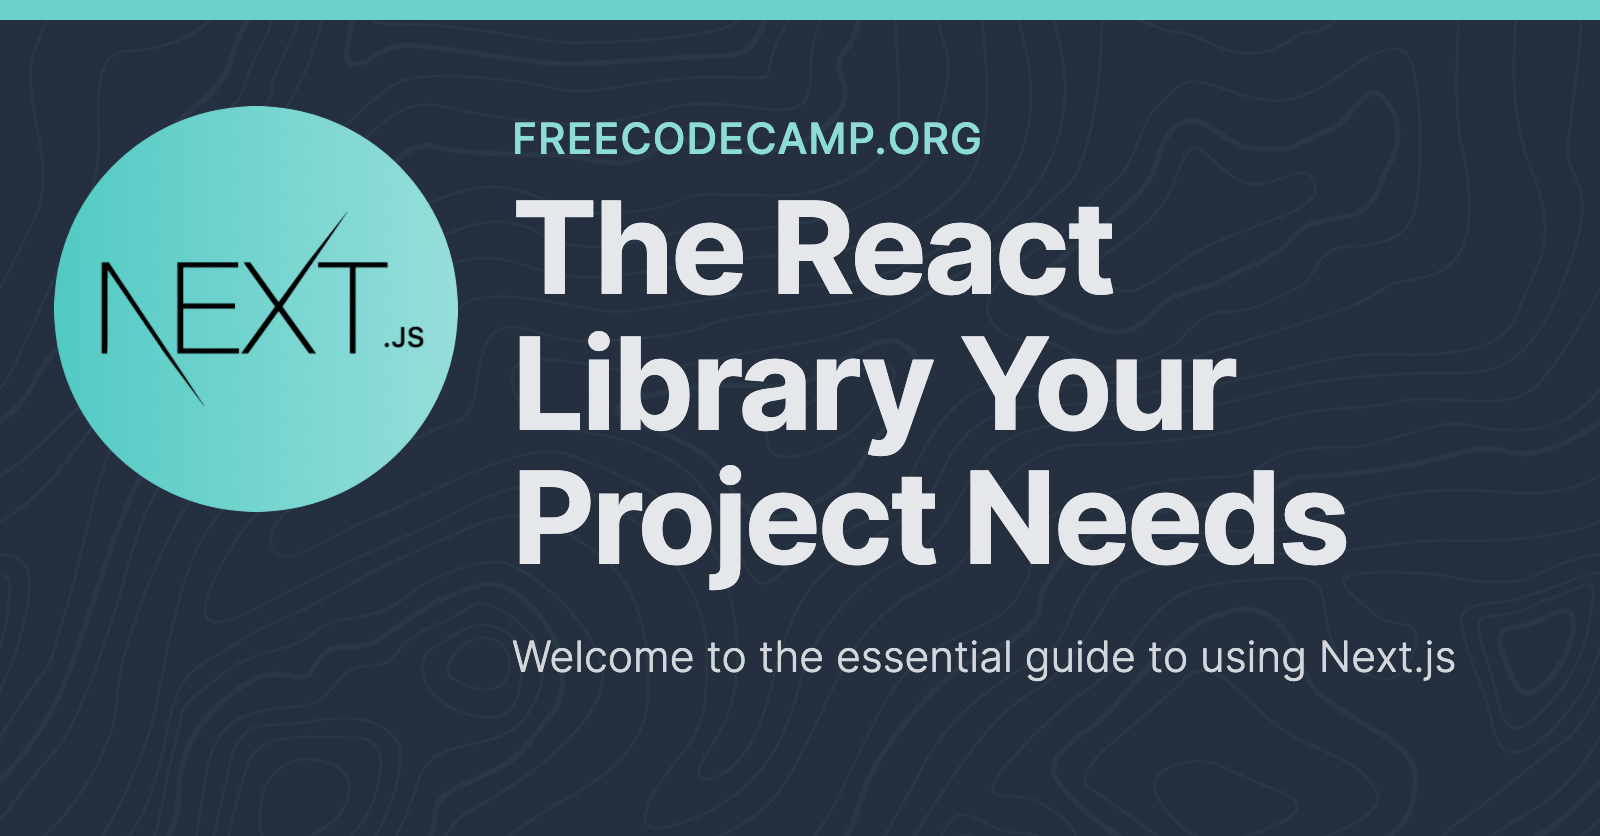 Get Started with Next.js – The React Library Your Project Needs